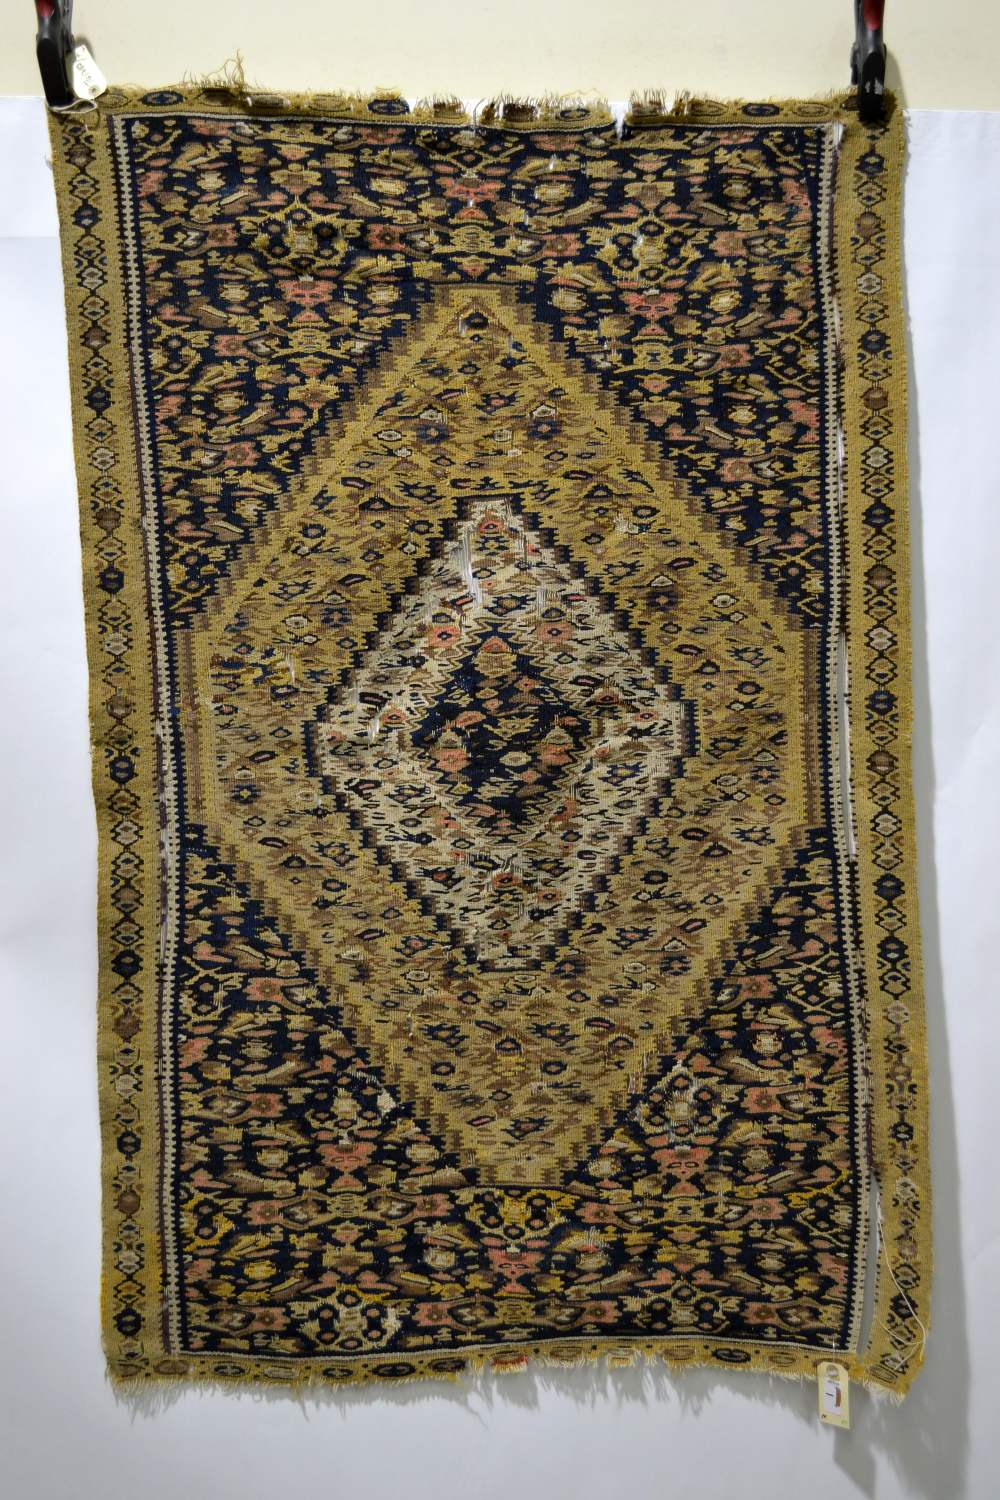 Senneh ghileem, north west Persia, about 1930-40s, 4ft. 7in. x 2ft. 11in. 1.40m. x 0.89m.